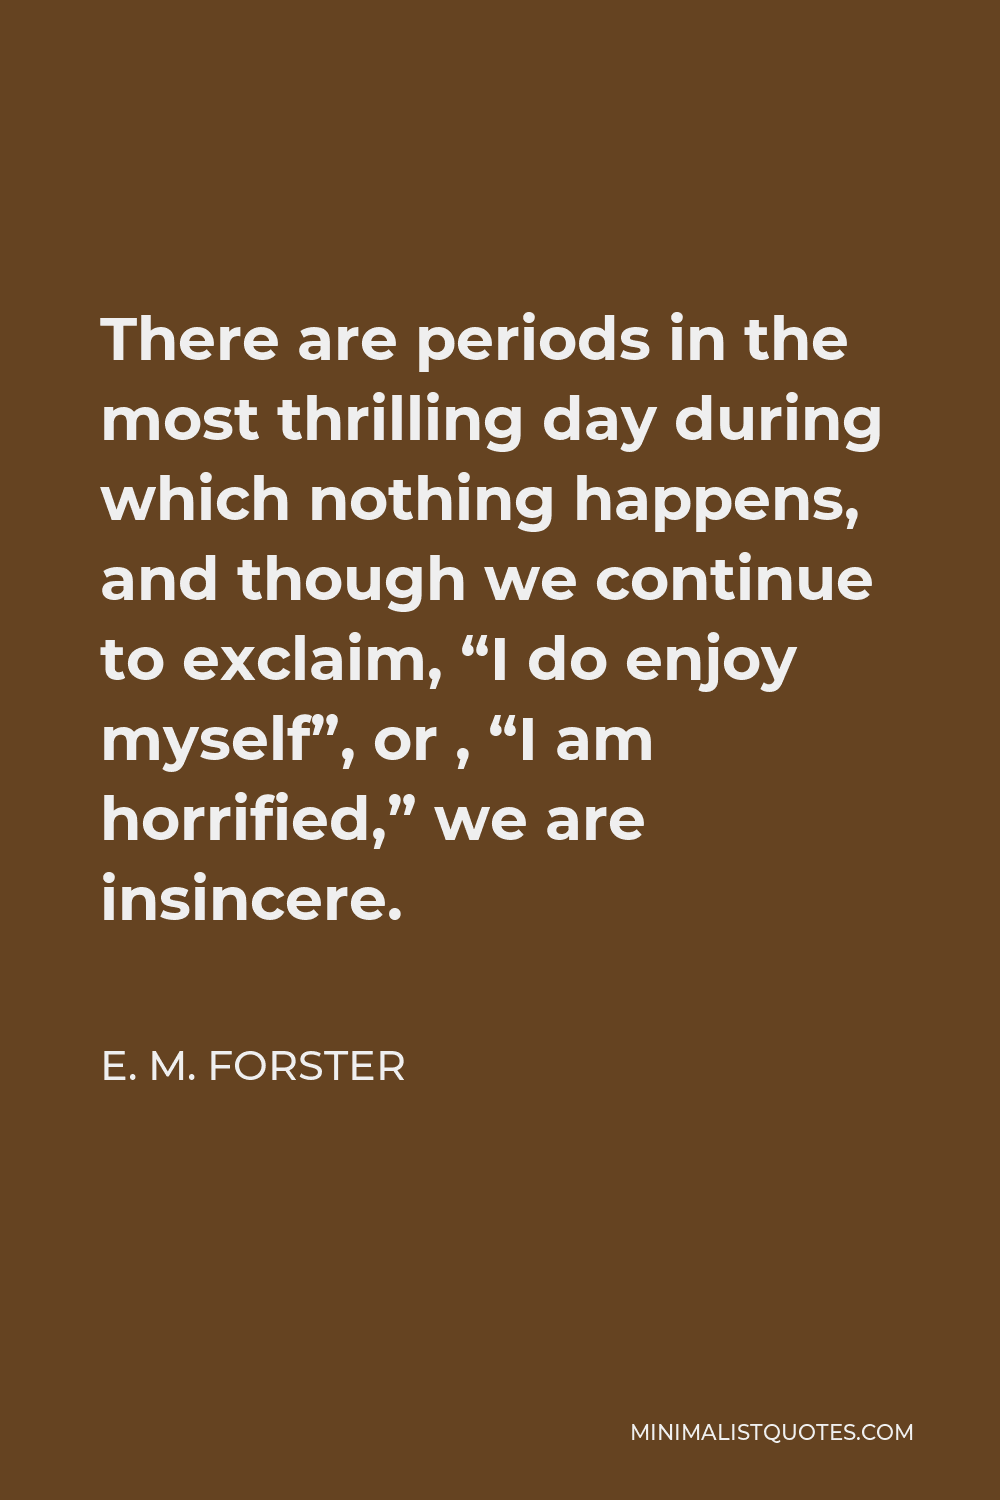 E. M. Forster Quote - There are periods in the most thrilling day during which nothing happens, and though we continue to exclaim, “I do enjoy myself”, or , “I am horrified,” we are insincere.